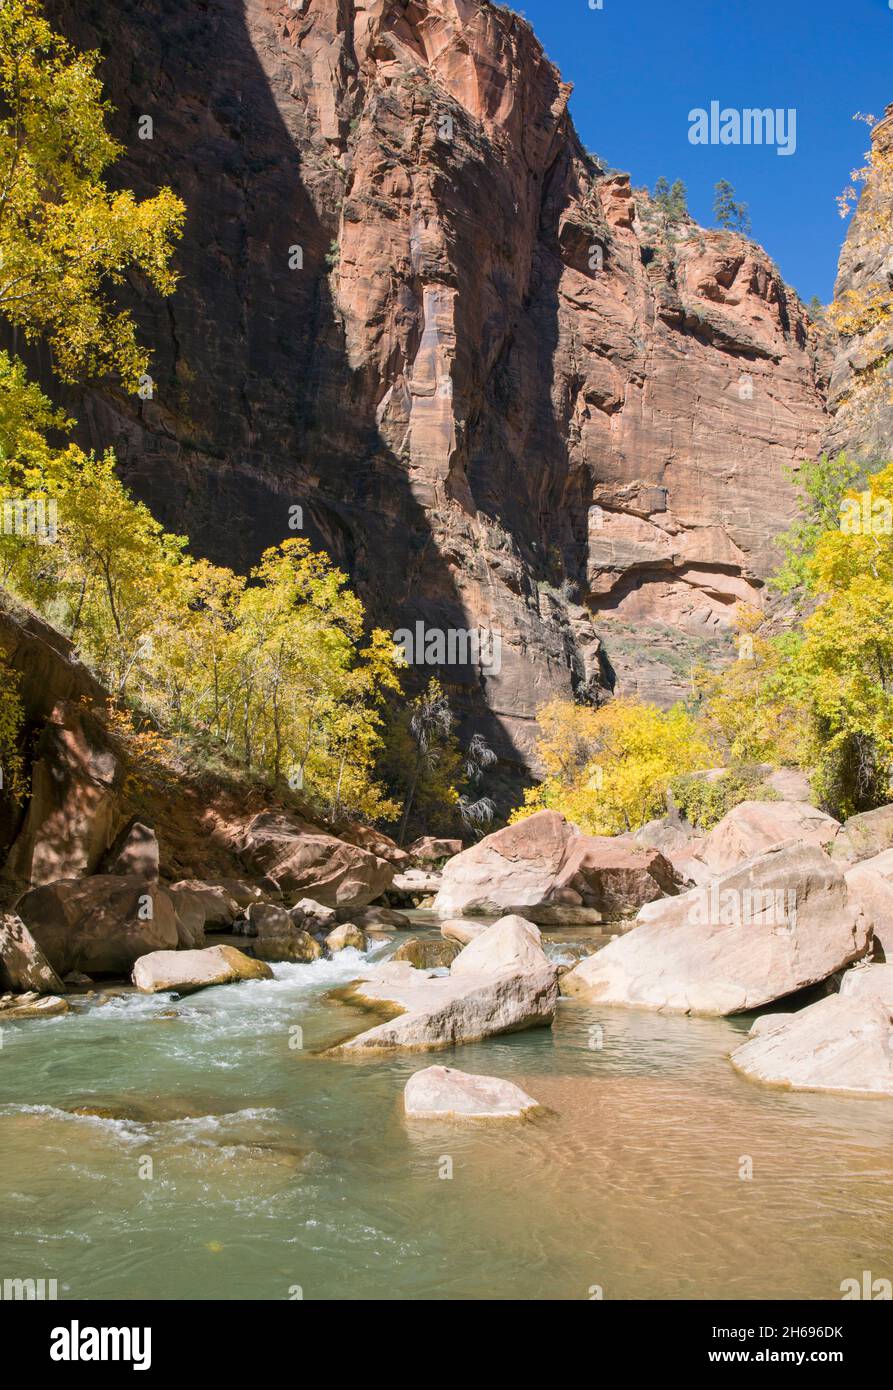 Zion National Park, Utah, USA. View along the boulder-strewn Virgin River to the towering sandstone cliffs of the Temple of Sinawava, autumn. Stock Photo